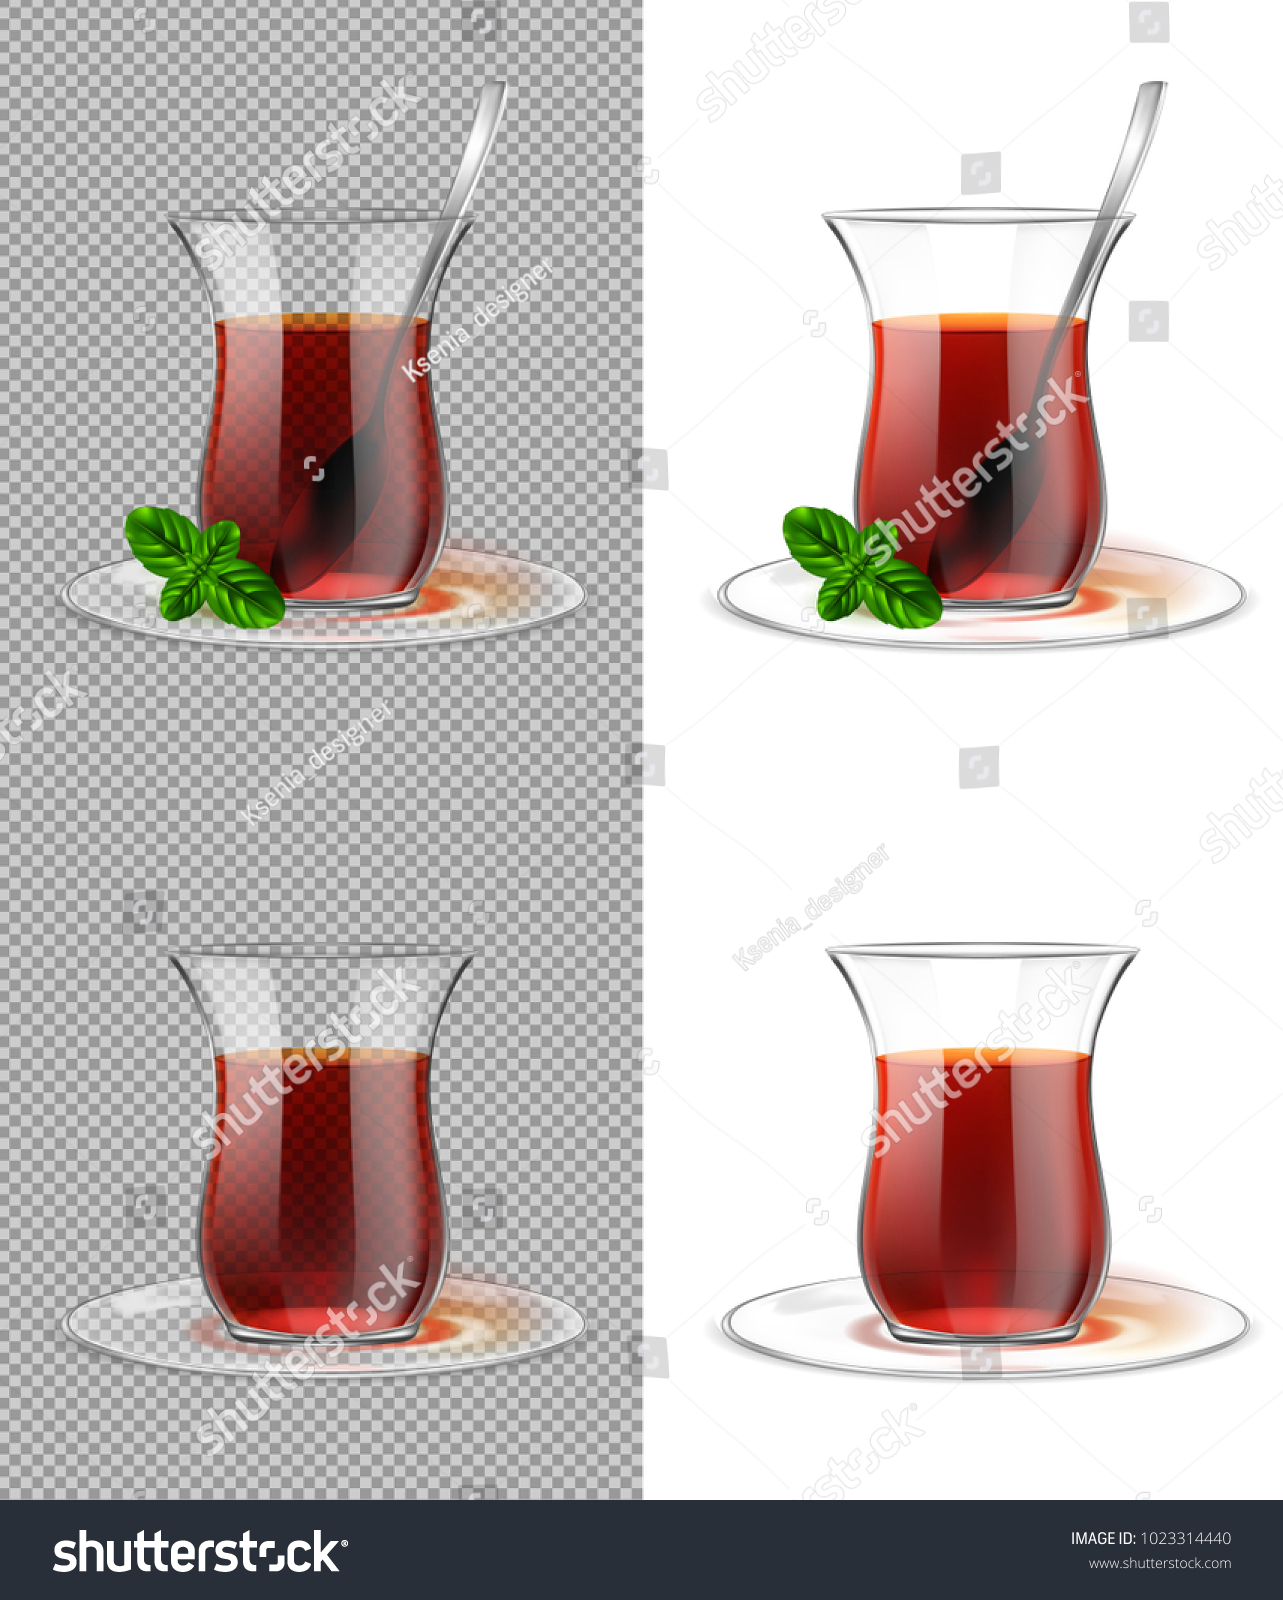 SVG of Turkish tea cup with black tea, silver spoon and mint. Armudu glass svg